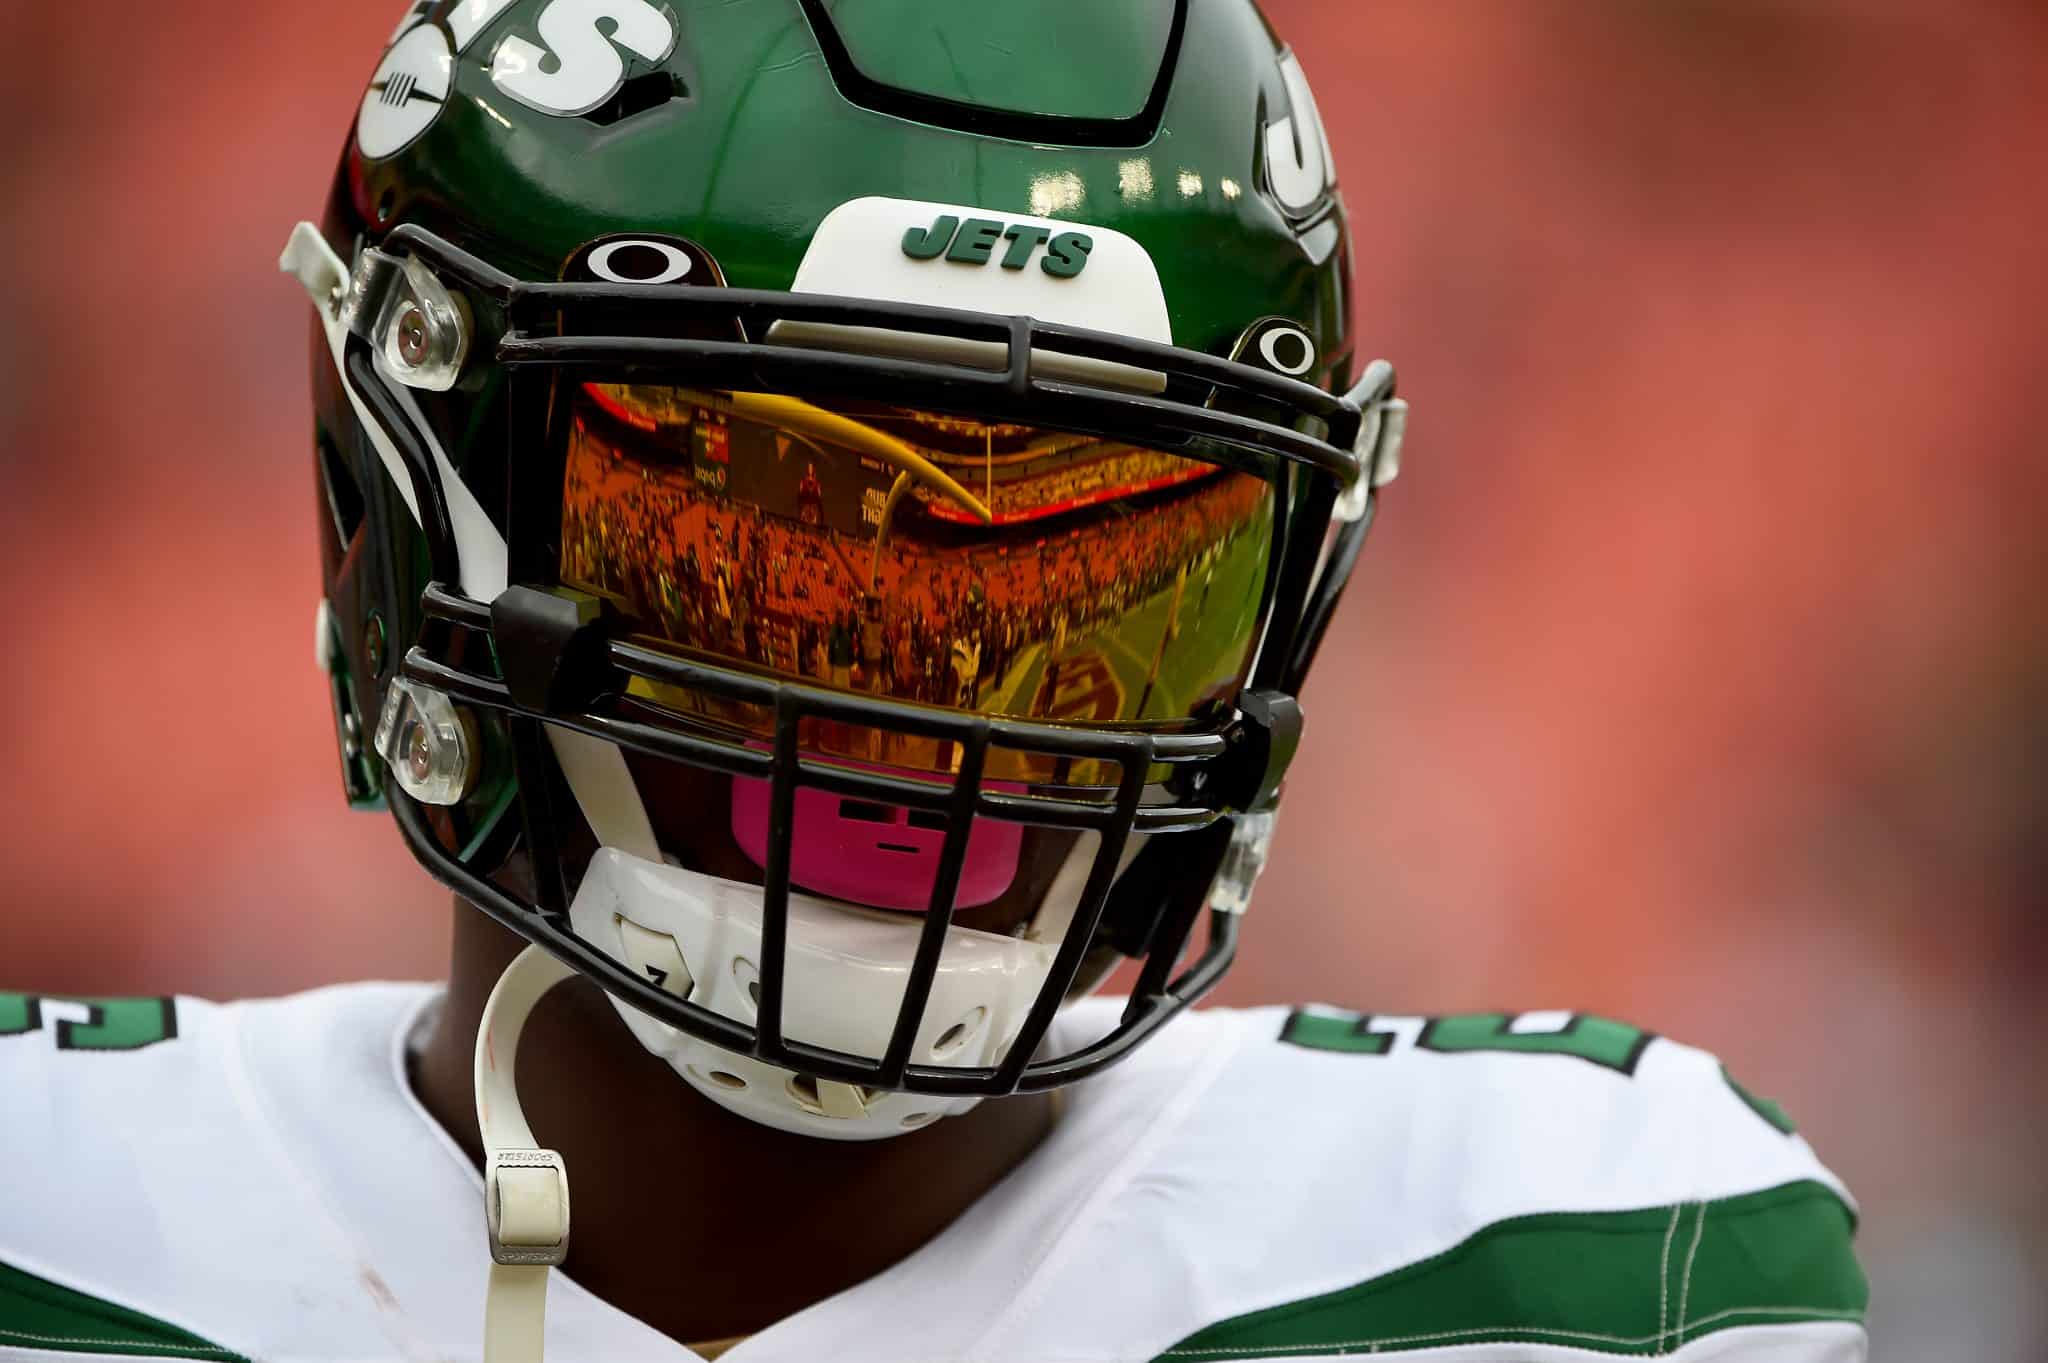 LANDOVER, MD - NOVEMBER 17: Le'Veon Bell #26 of the New York Jets looks on prior to the game against the Washington Redskins at FedExField on November 17, 2019 in Landover, Maryland.